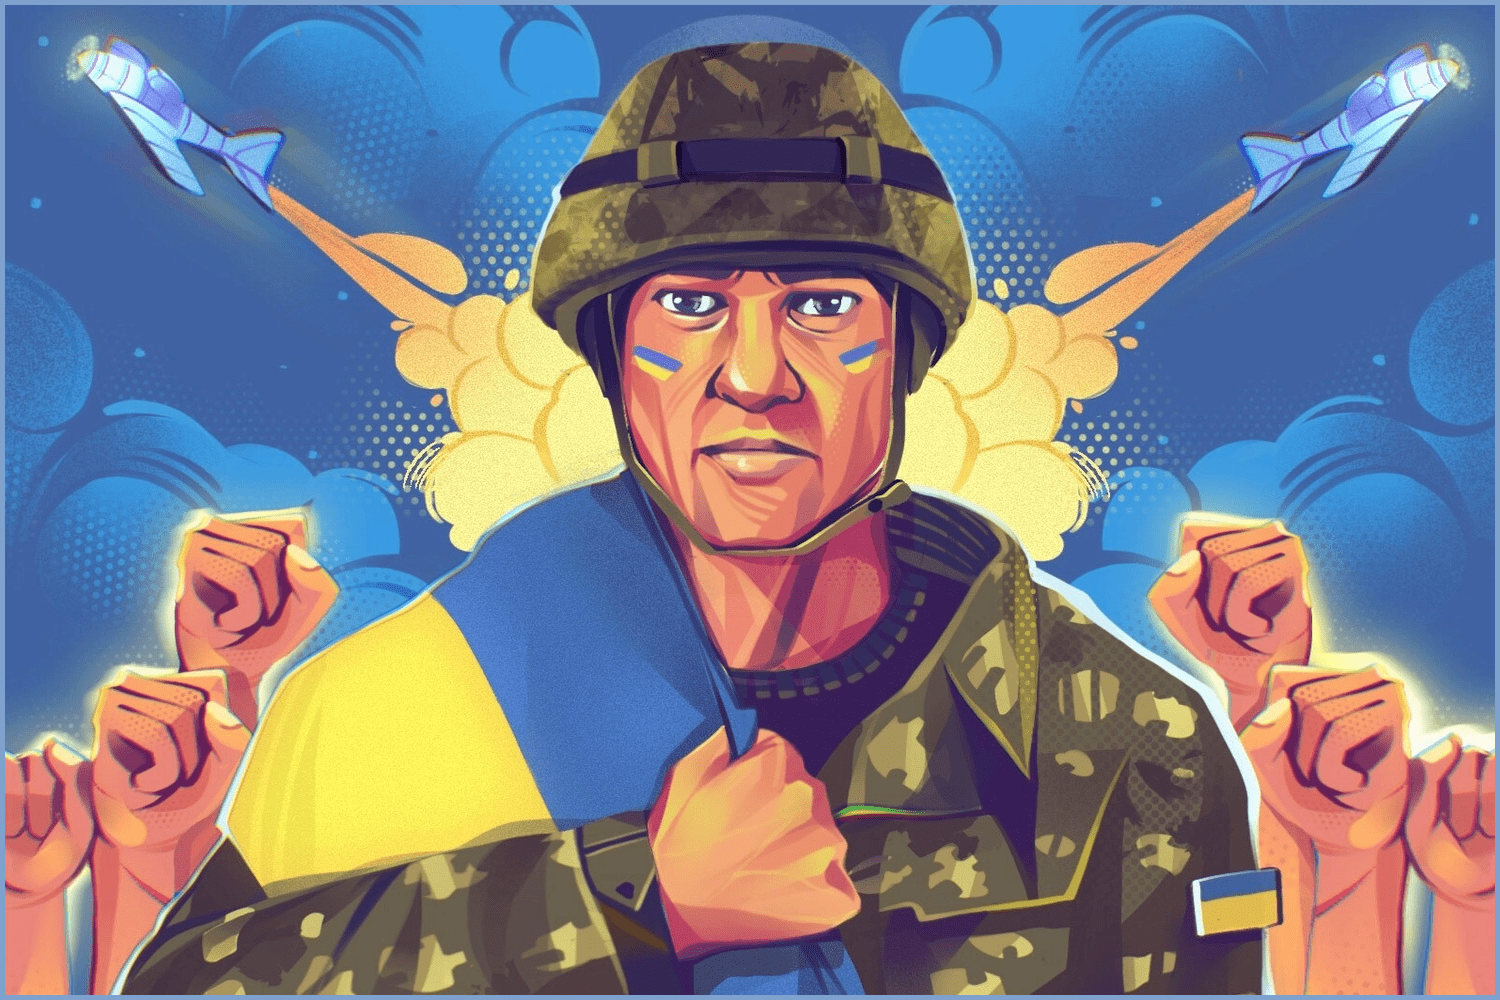 Ukrainian Soldier by Lily.